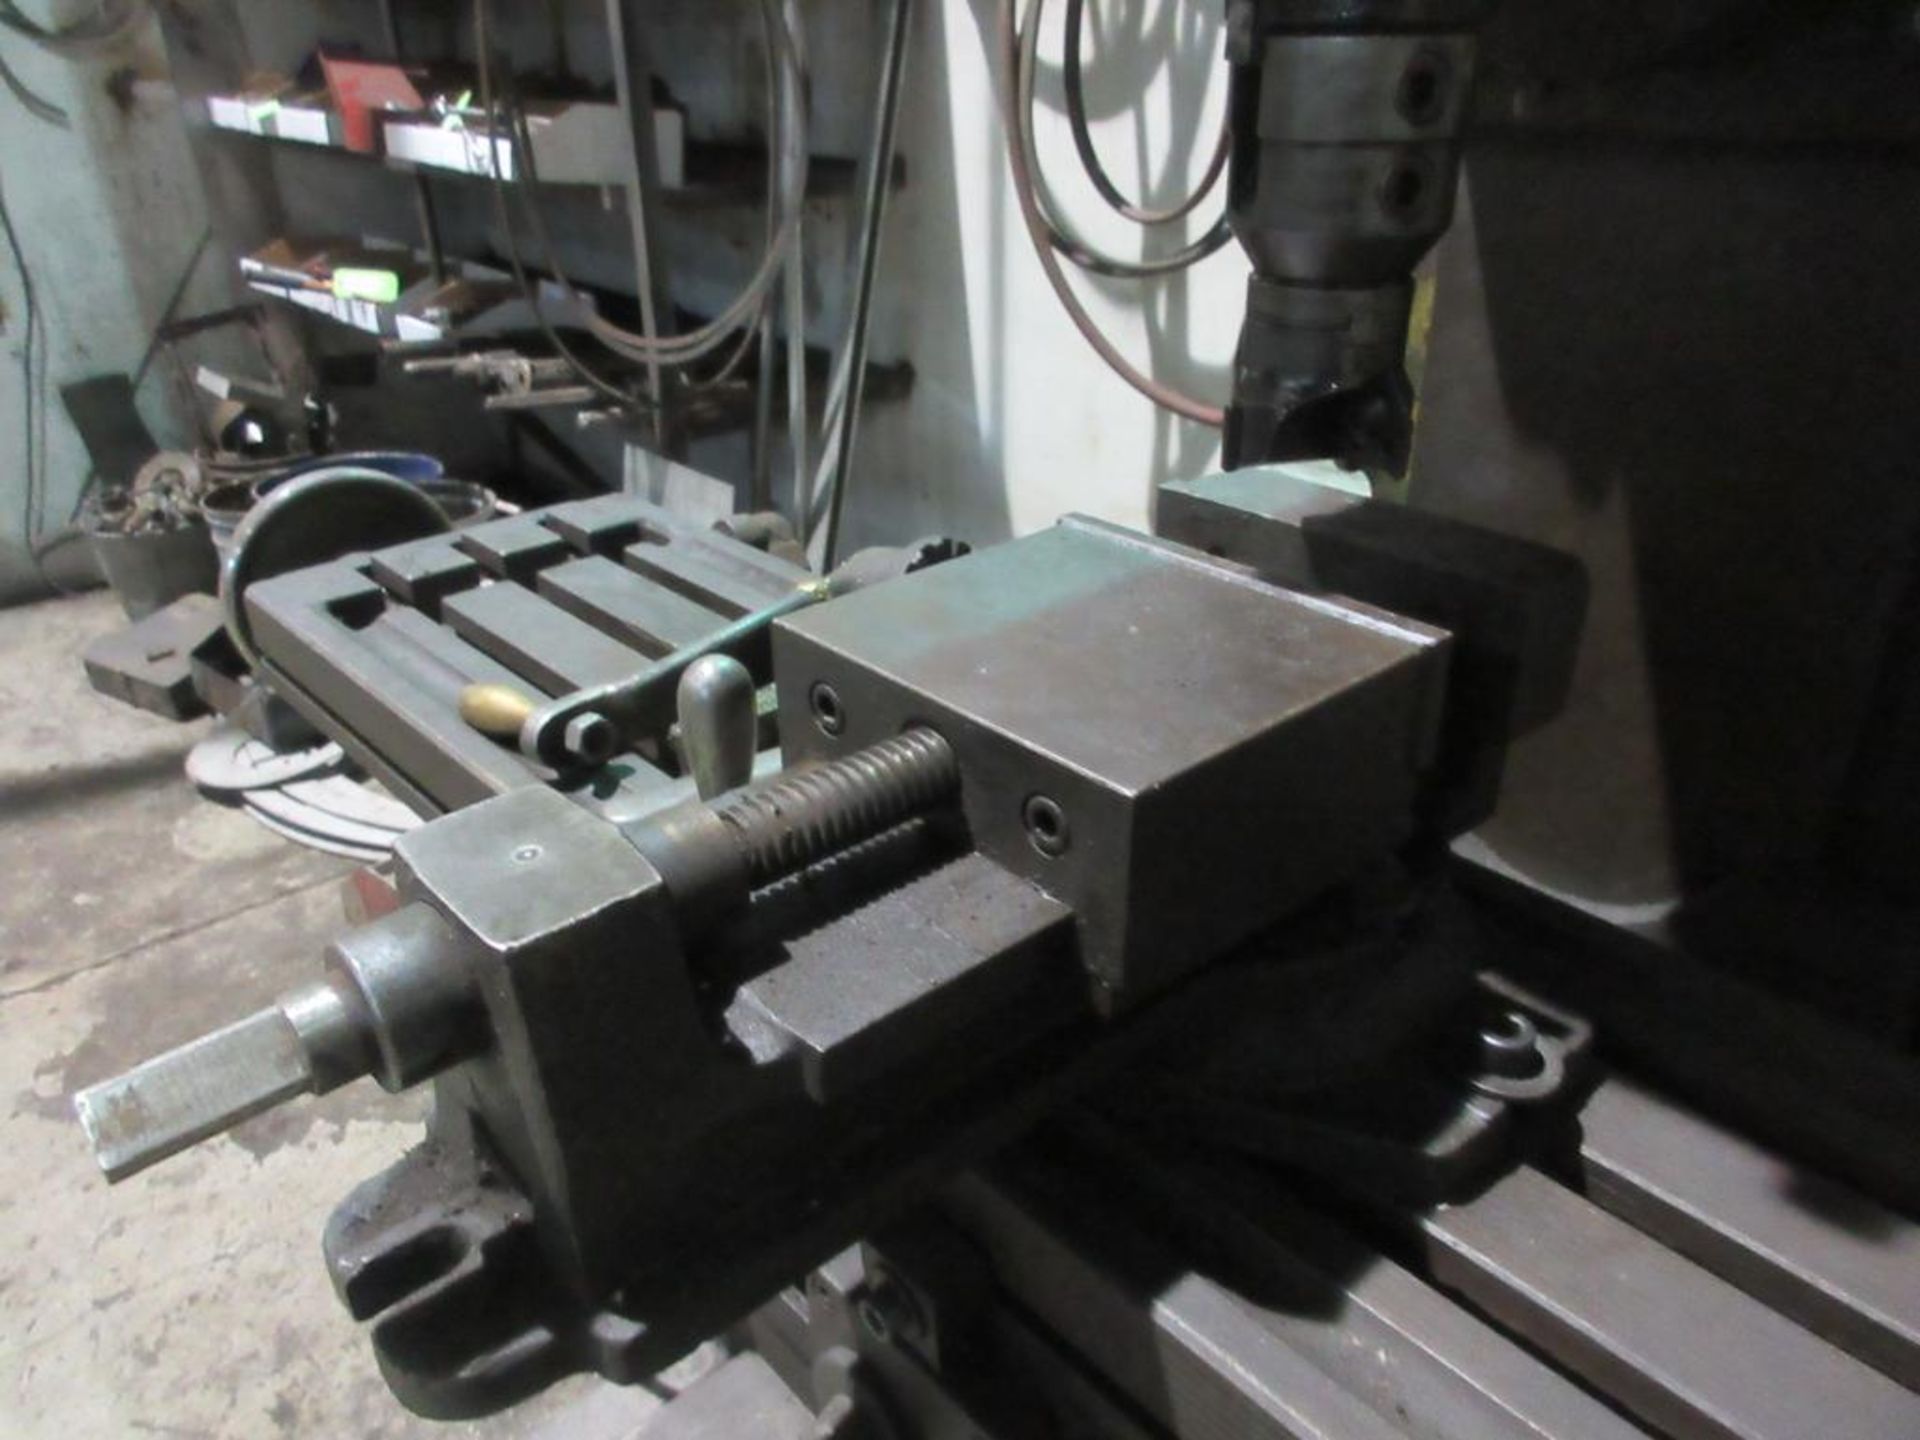 LAGUN MILLING MACHINE WITH 10' X 44" TABLE, 6" VISE, 3" SPINDLE WITH CUTTING TOOL, 28 TO 606RPM (EAS - Image 4 of 6